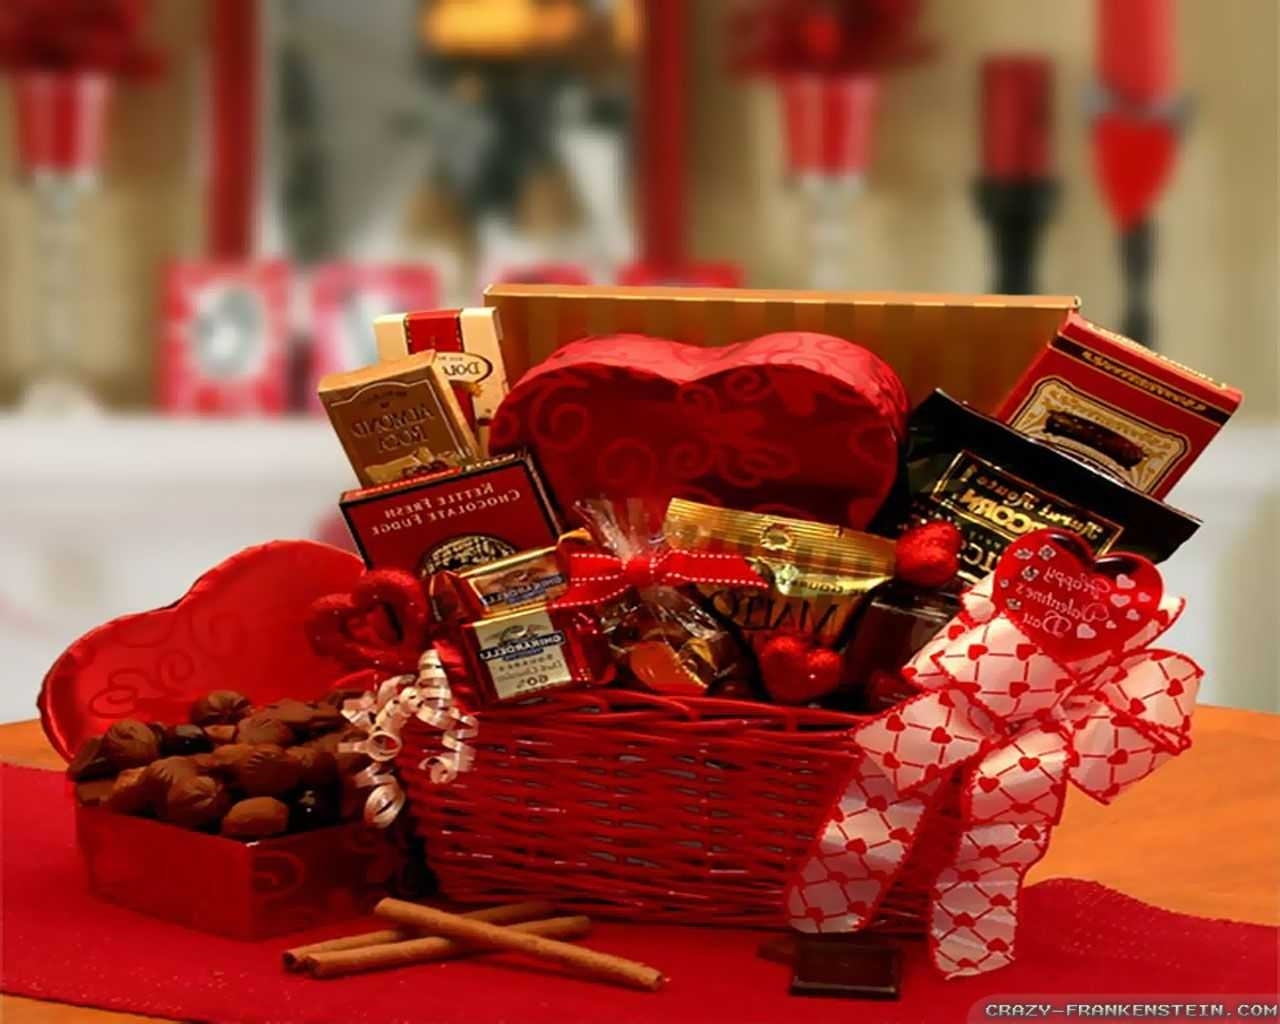 10 Perfect Good Ideas For Valentines Day For Her %name 2022